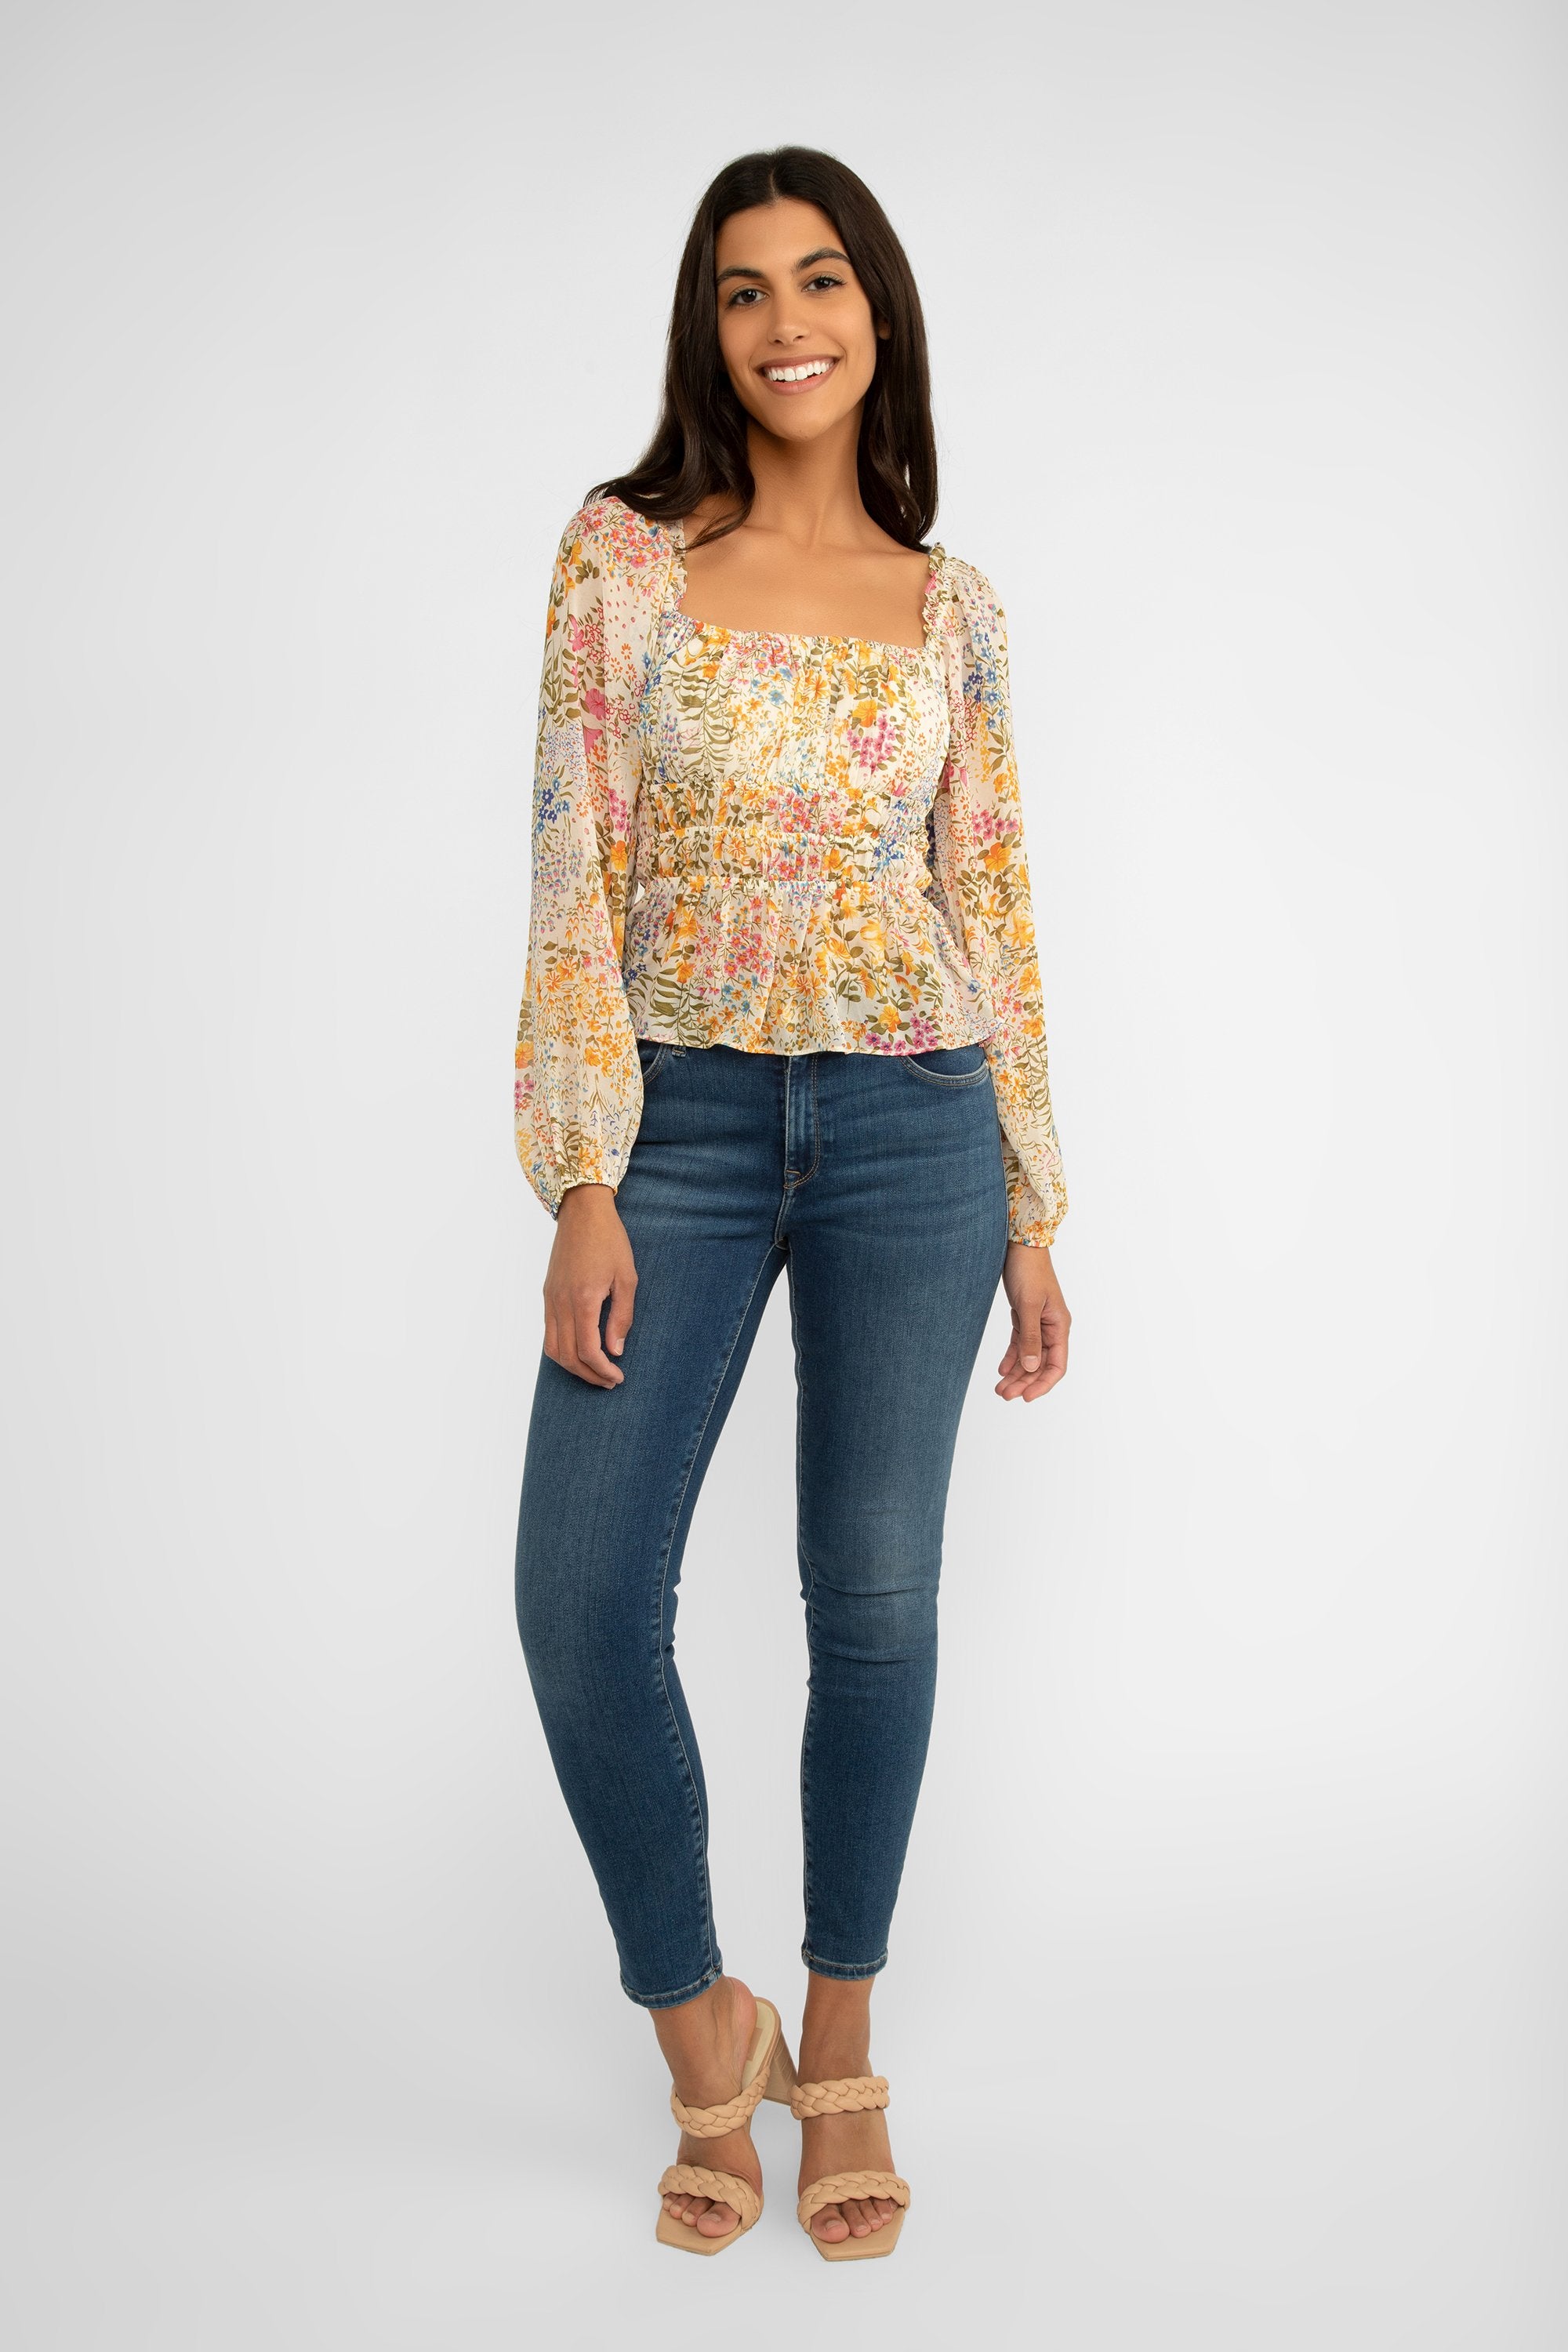 Lucy Paris (T2116) Women's Long Sleeve Cream Floral Chiffon Blouse with Square Neck and Gathered Waist